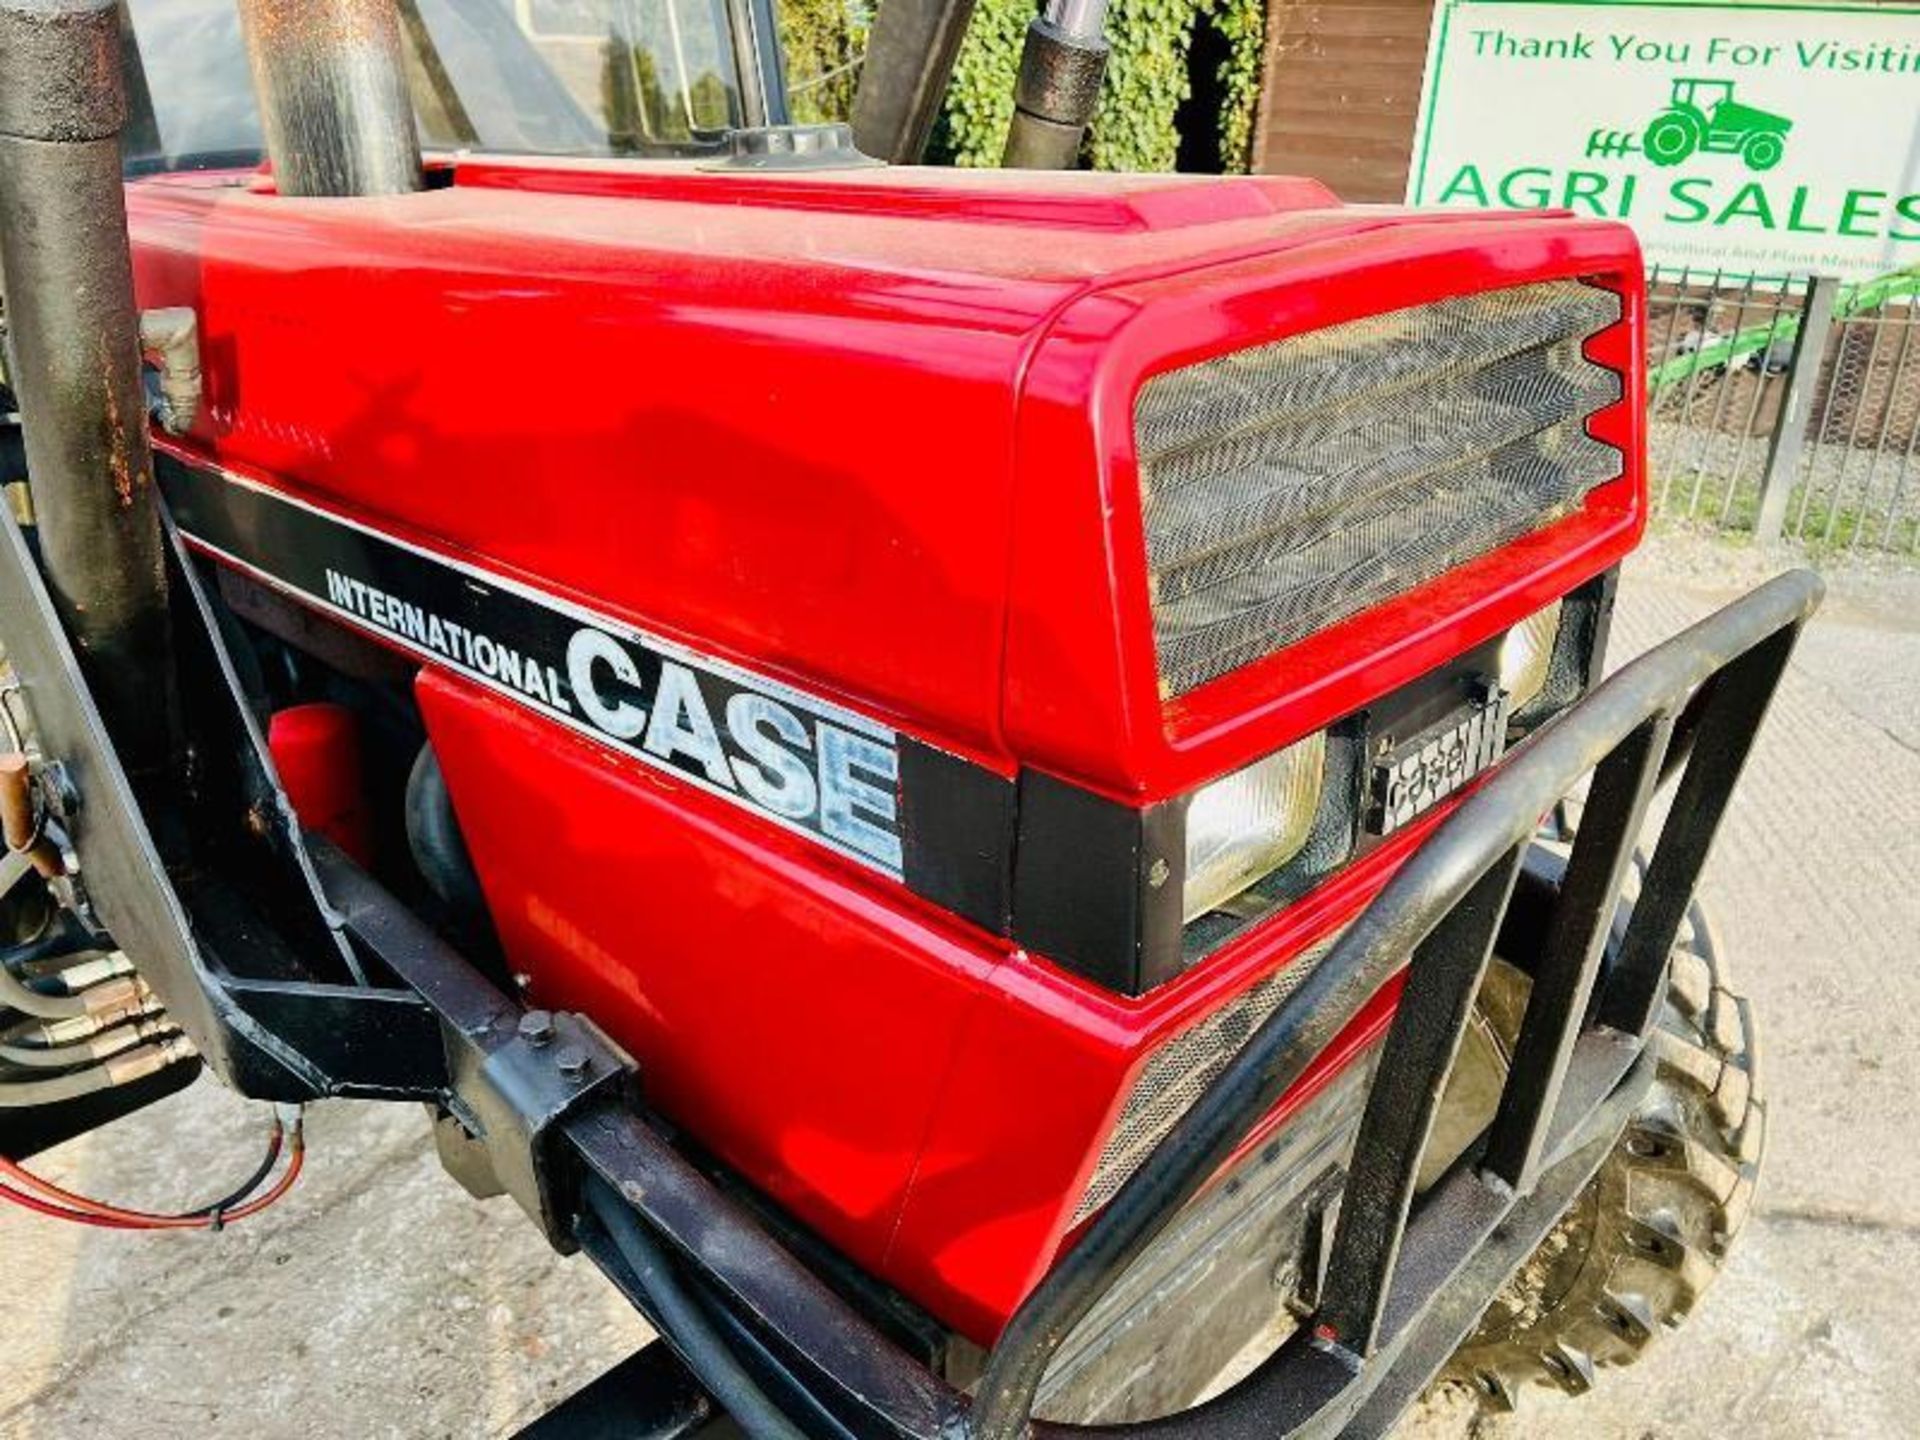 CASE 885XL TRACTOR C/W FRONT LOADER - Image 8 of 19